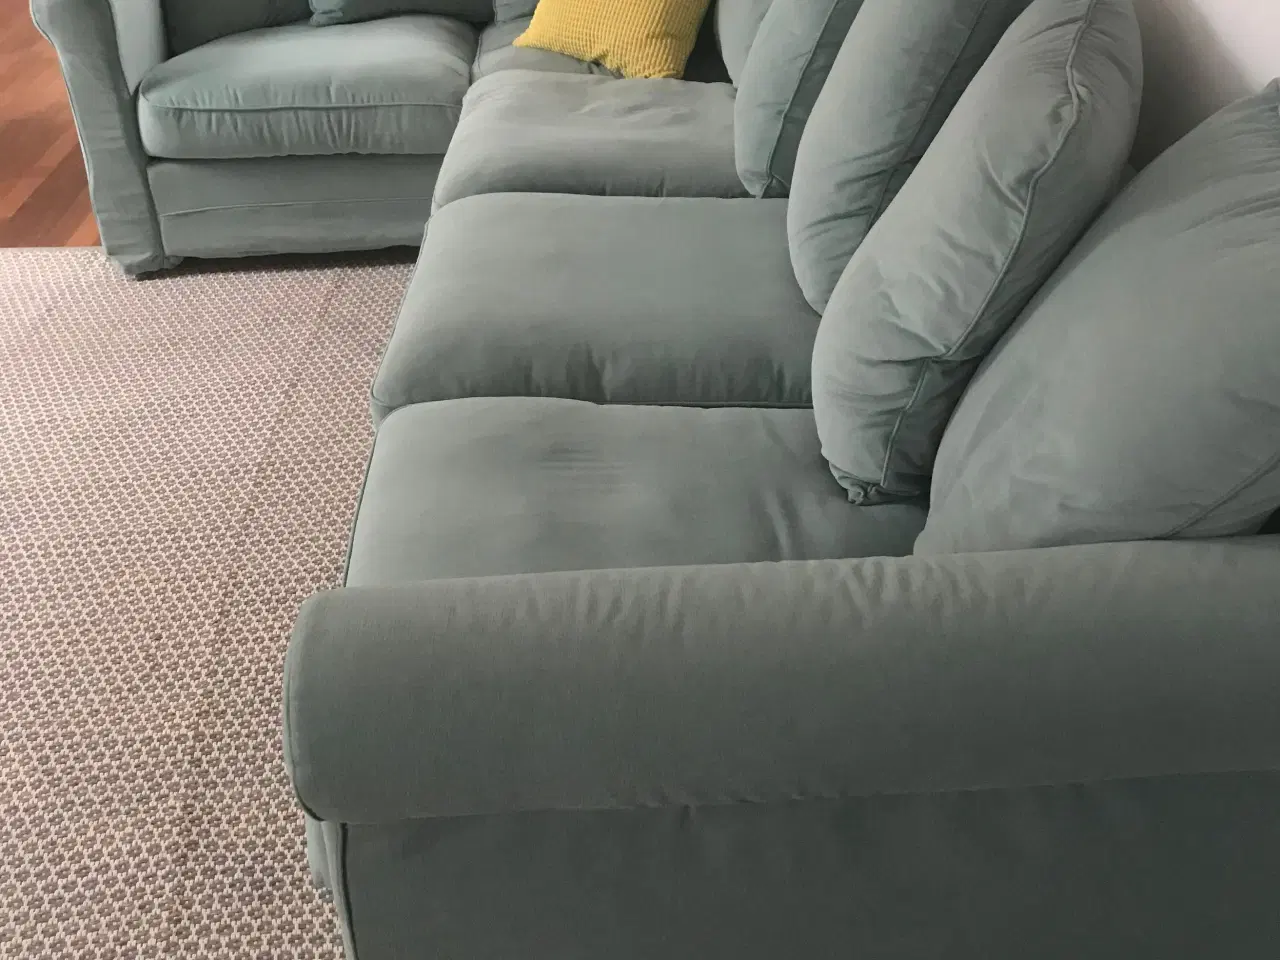 Billede 2 - Comfortable sofa for sale in perfect condition 